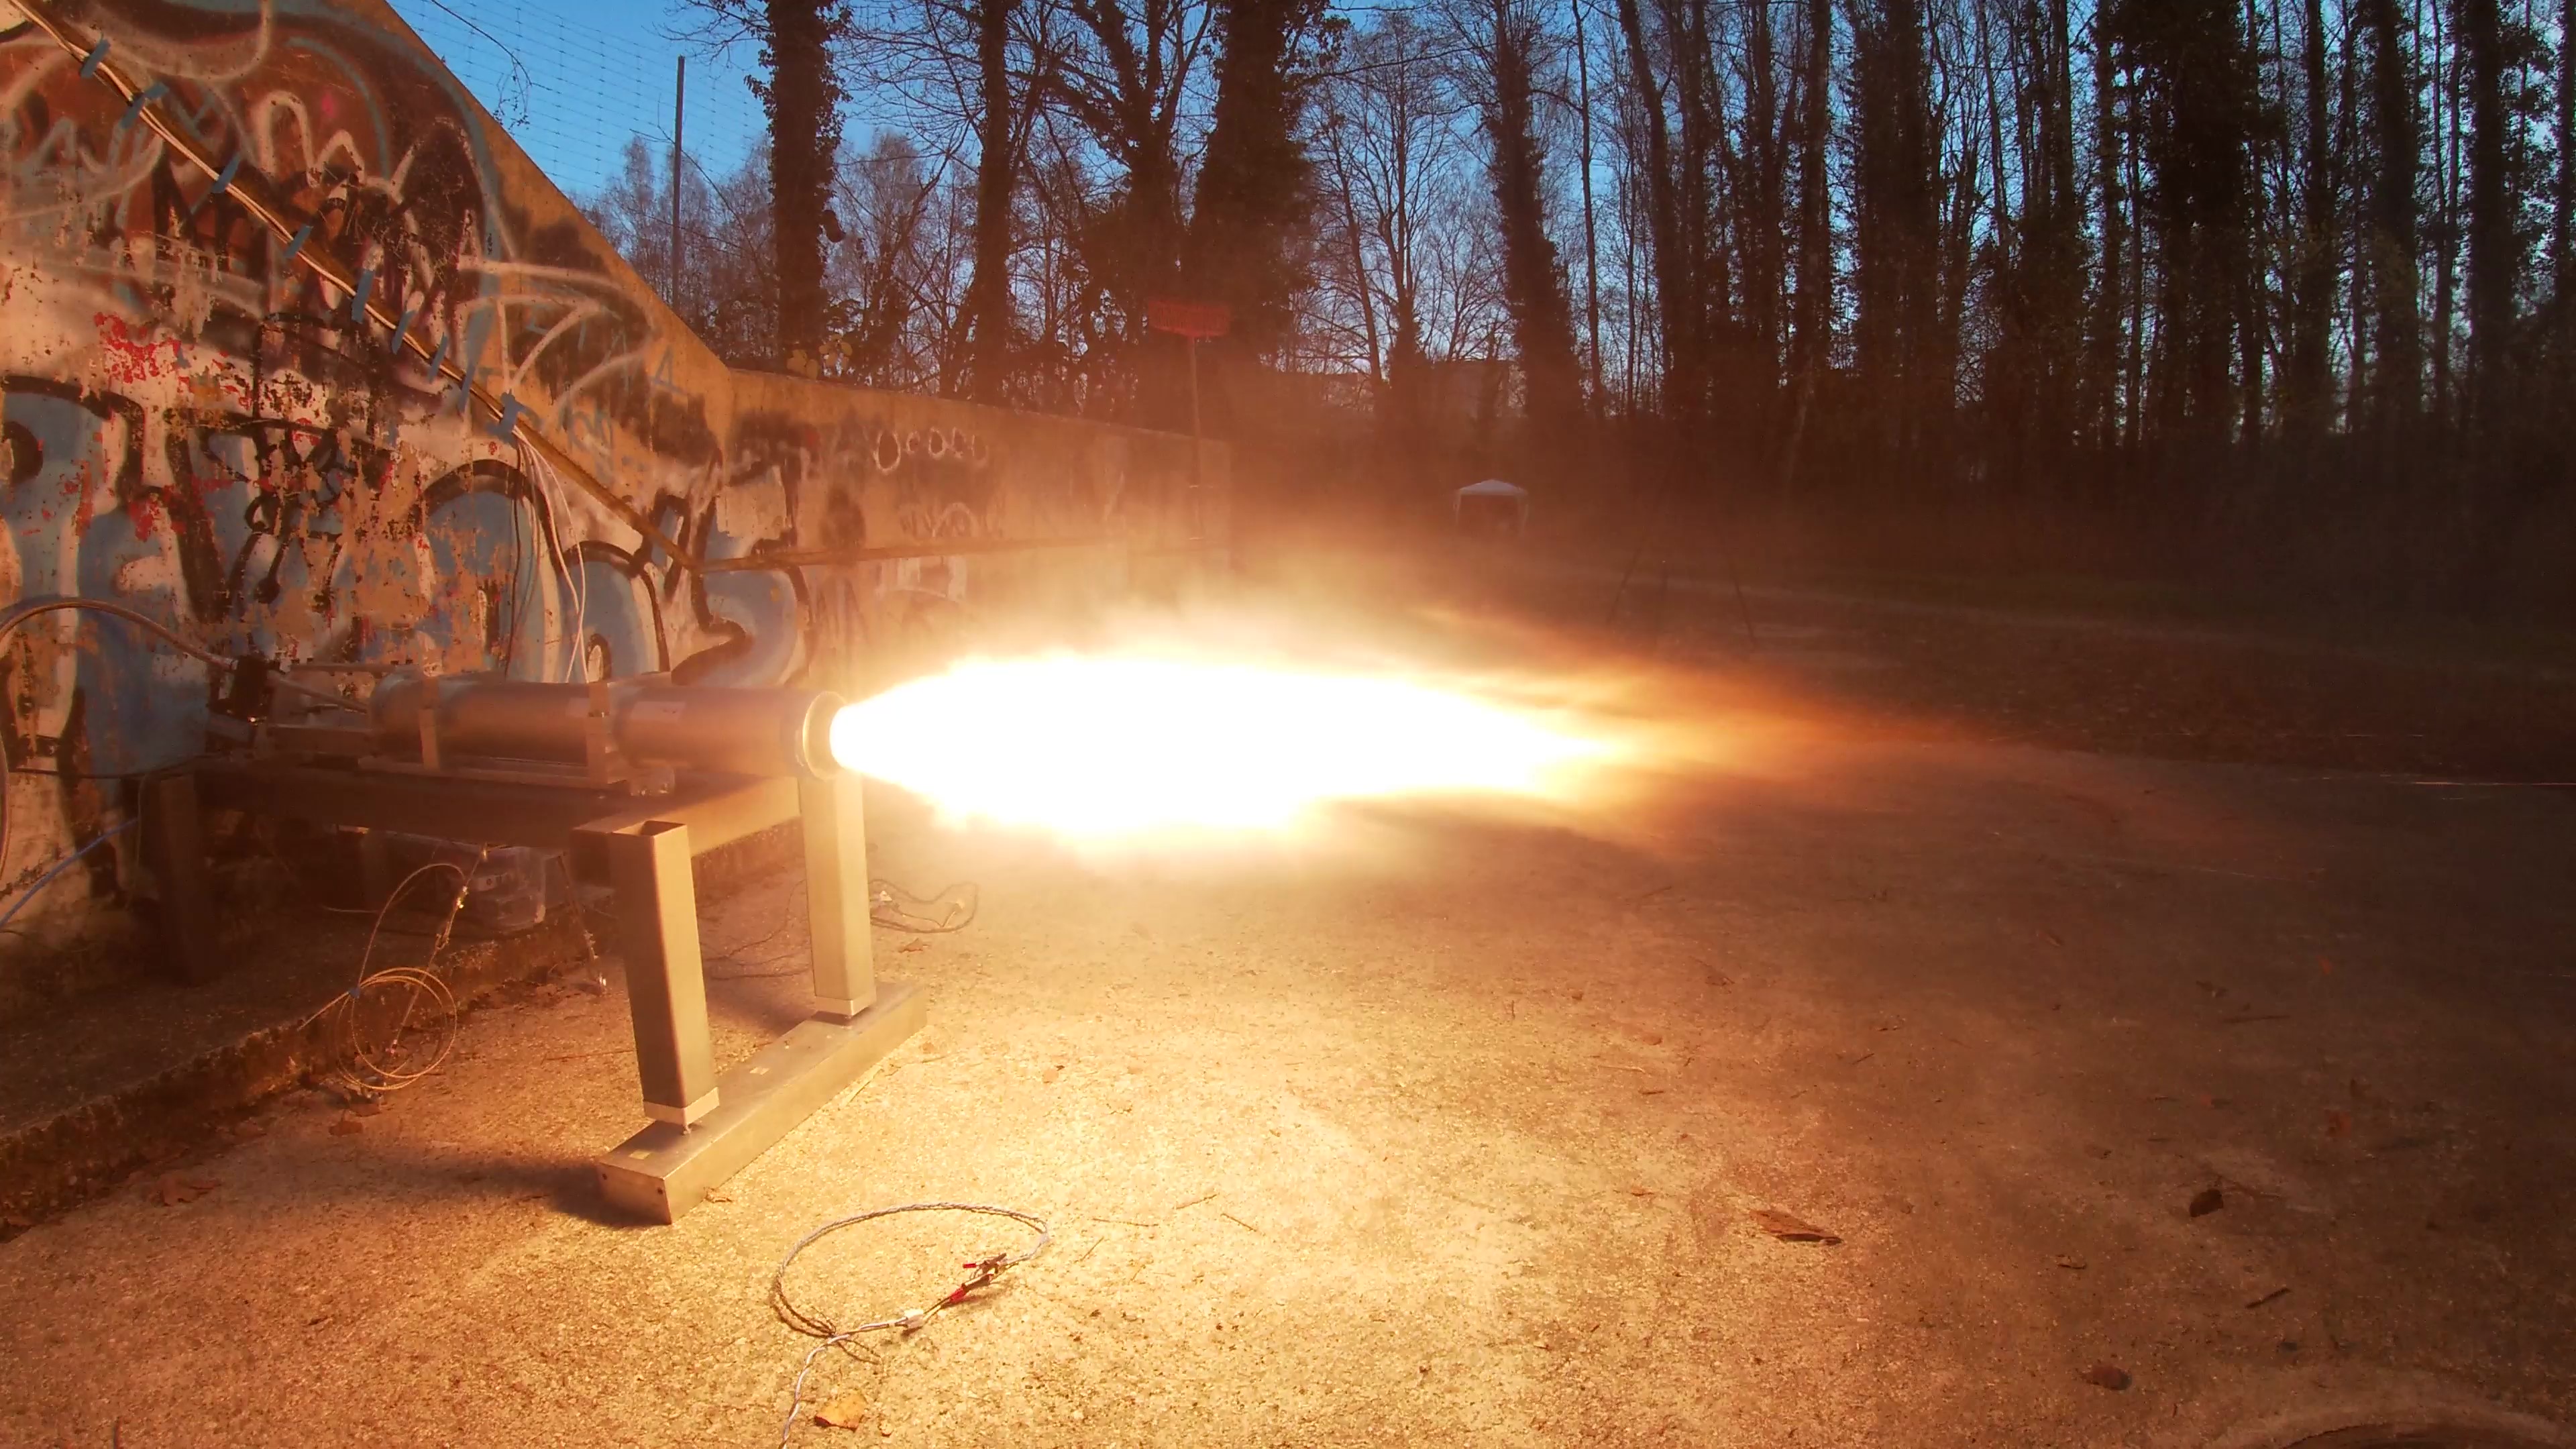 Static fire test of our rocket engine